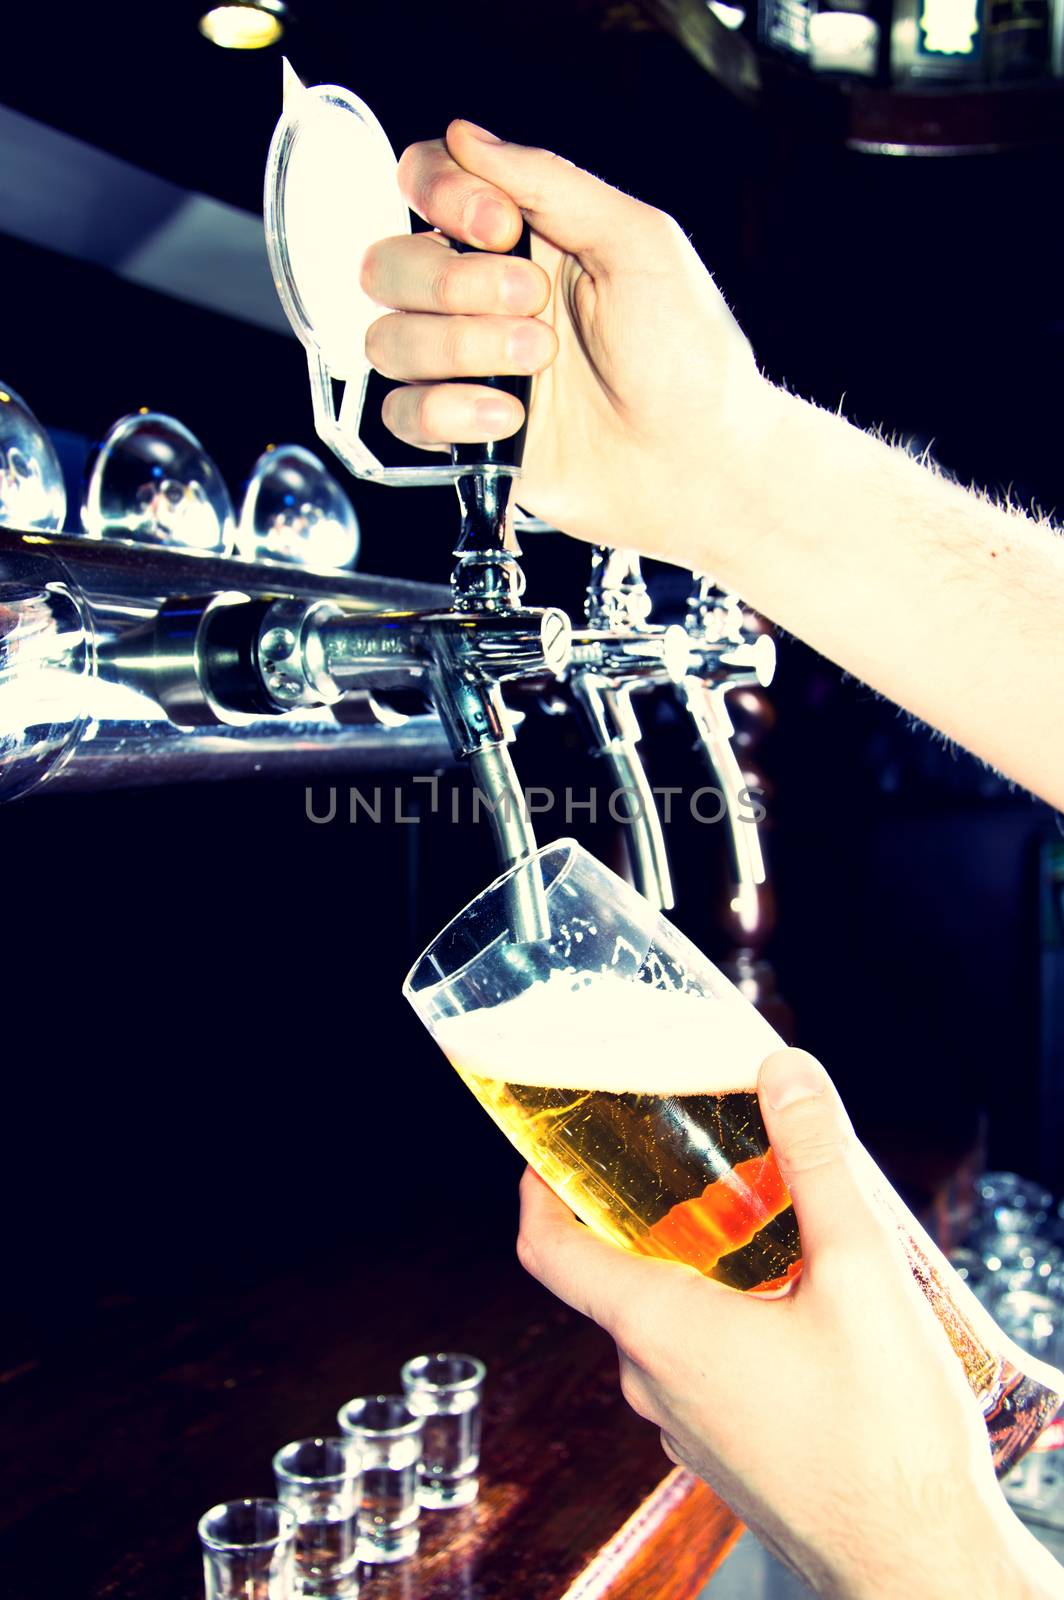 Bartender giving the beer from dispenser. Alcohol conceptual image.